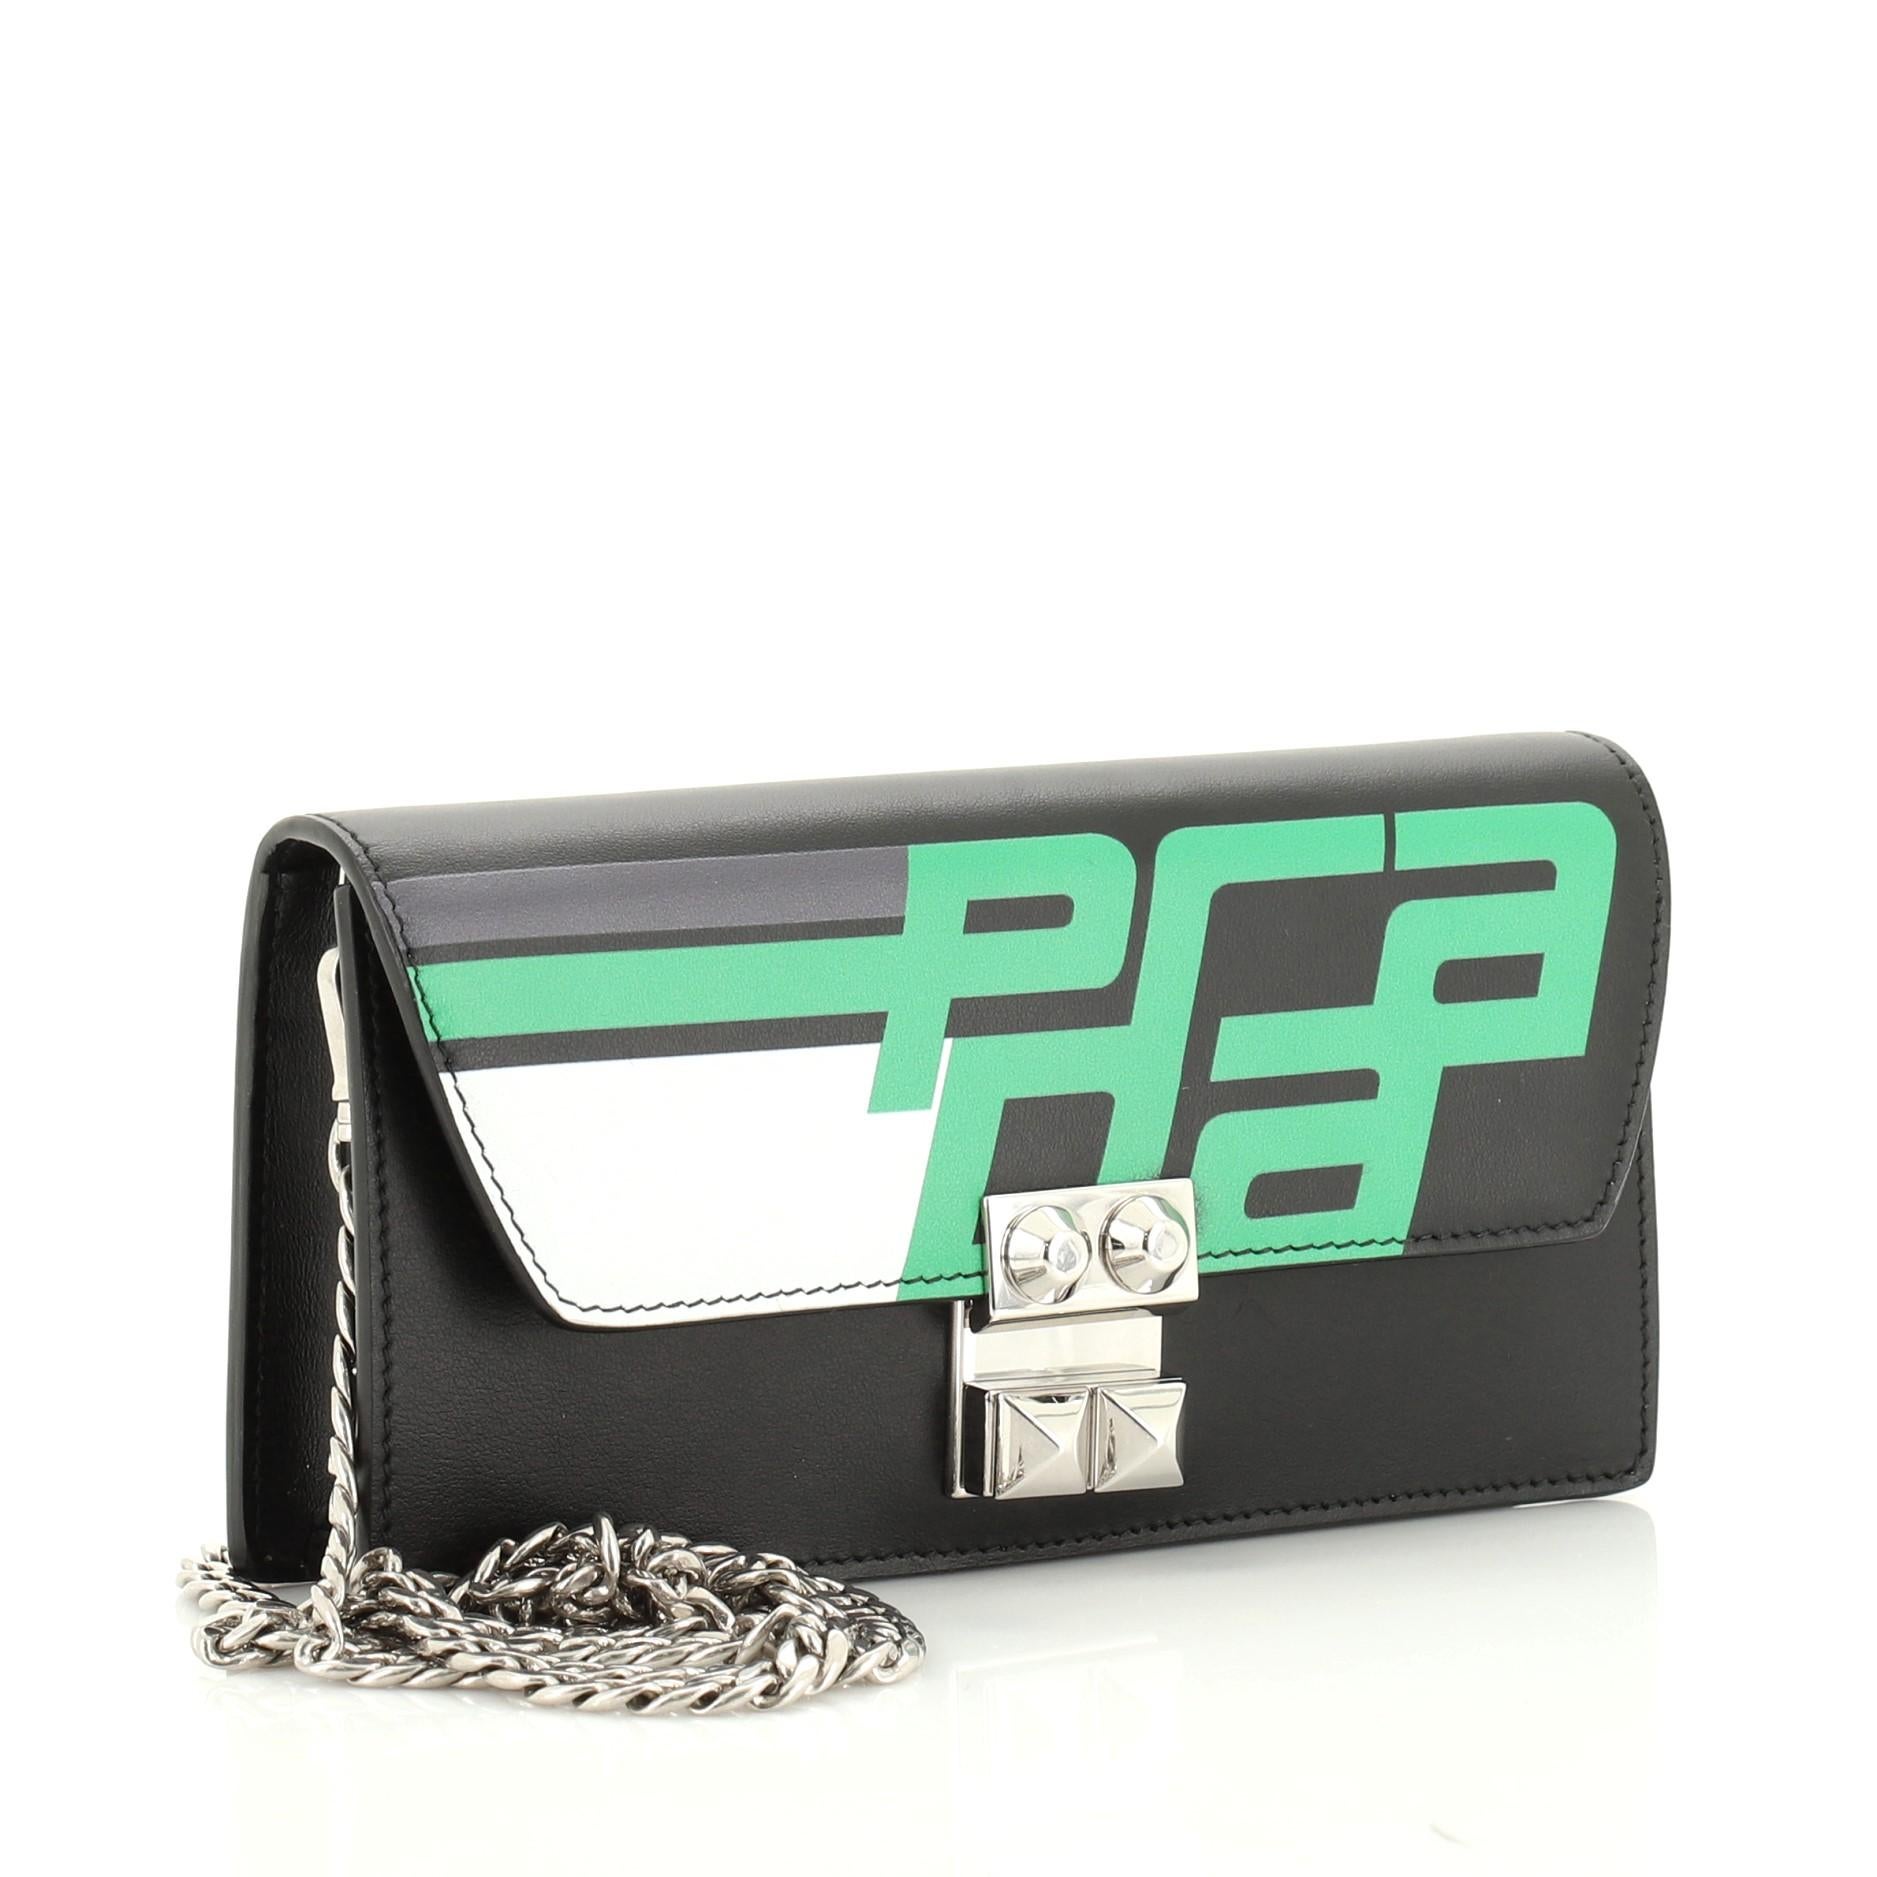 This Prada Elektra Wallet on Chain Printed Leather, crafted from black printed leather, features chain link strap, printed Prada logo on the front flap and silver-tone hardware. Its push-lock closure opens to a black leather interior with slip